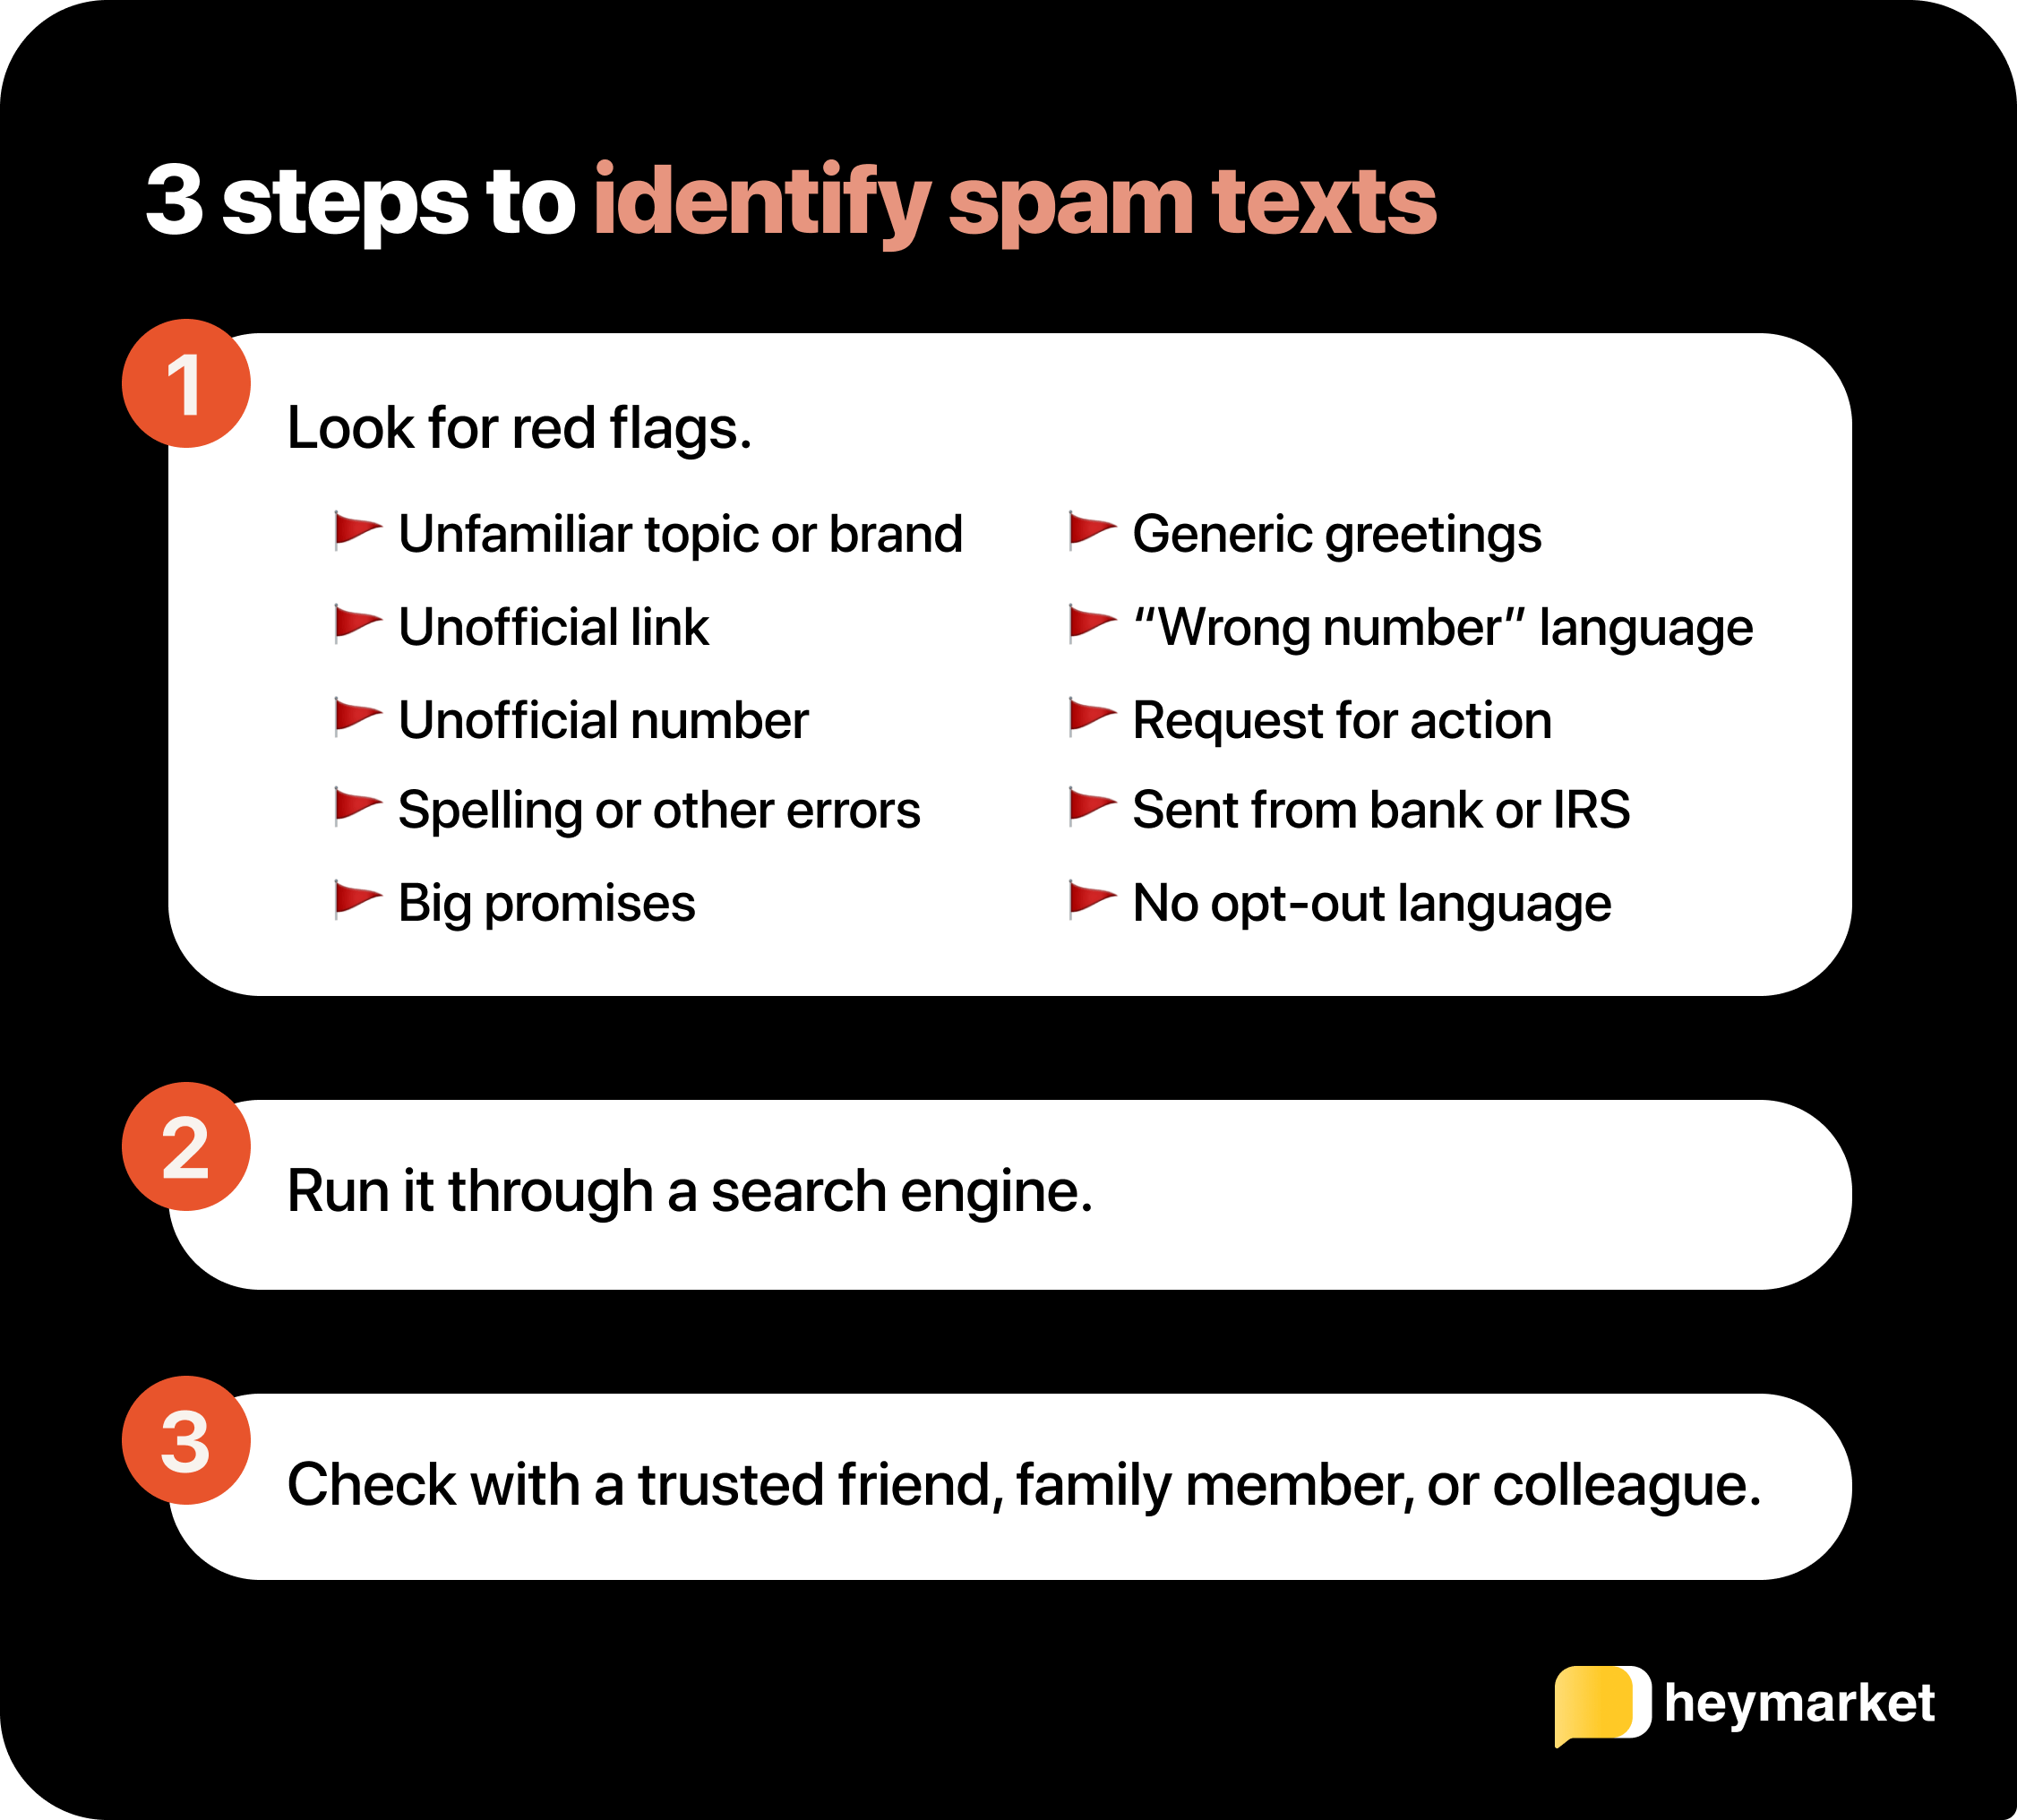 List of steps for identifying spam text messages.